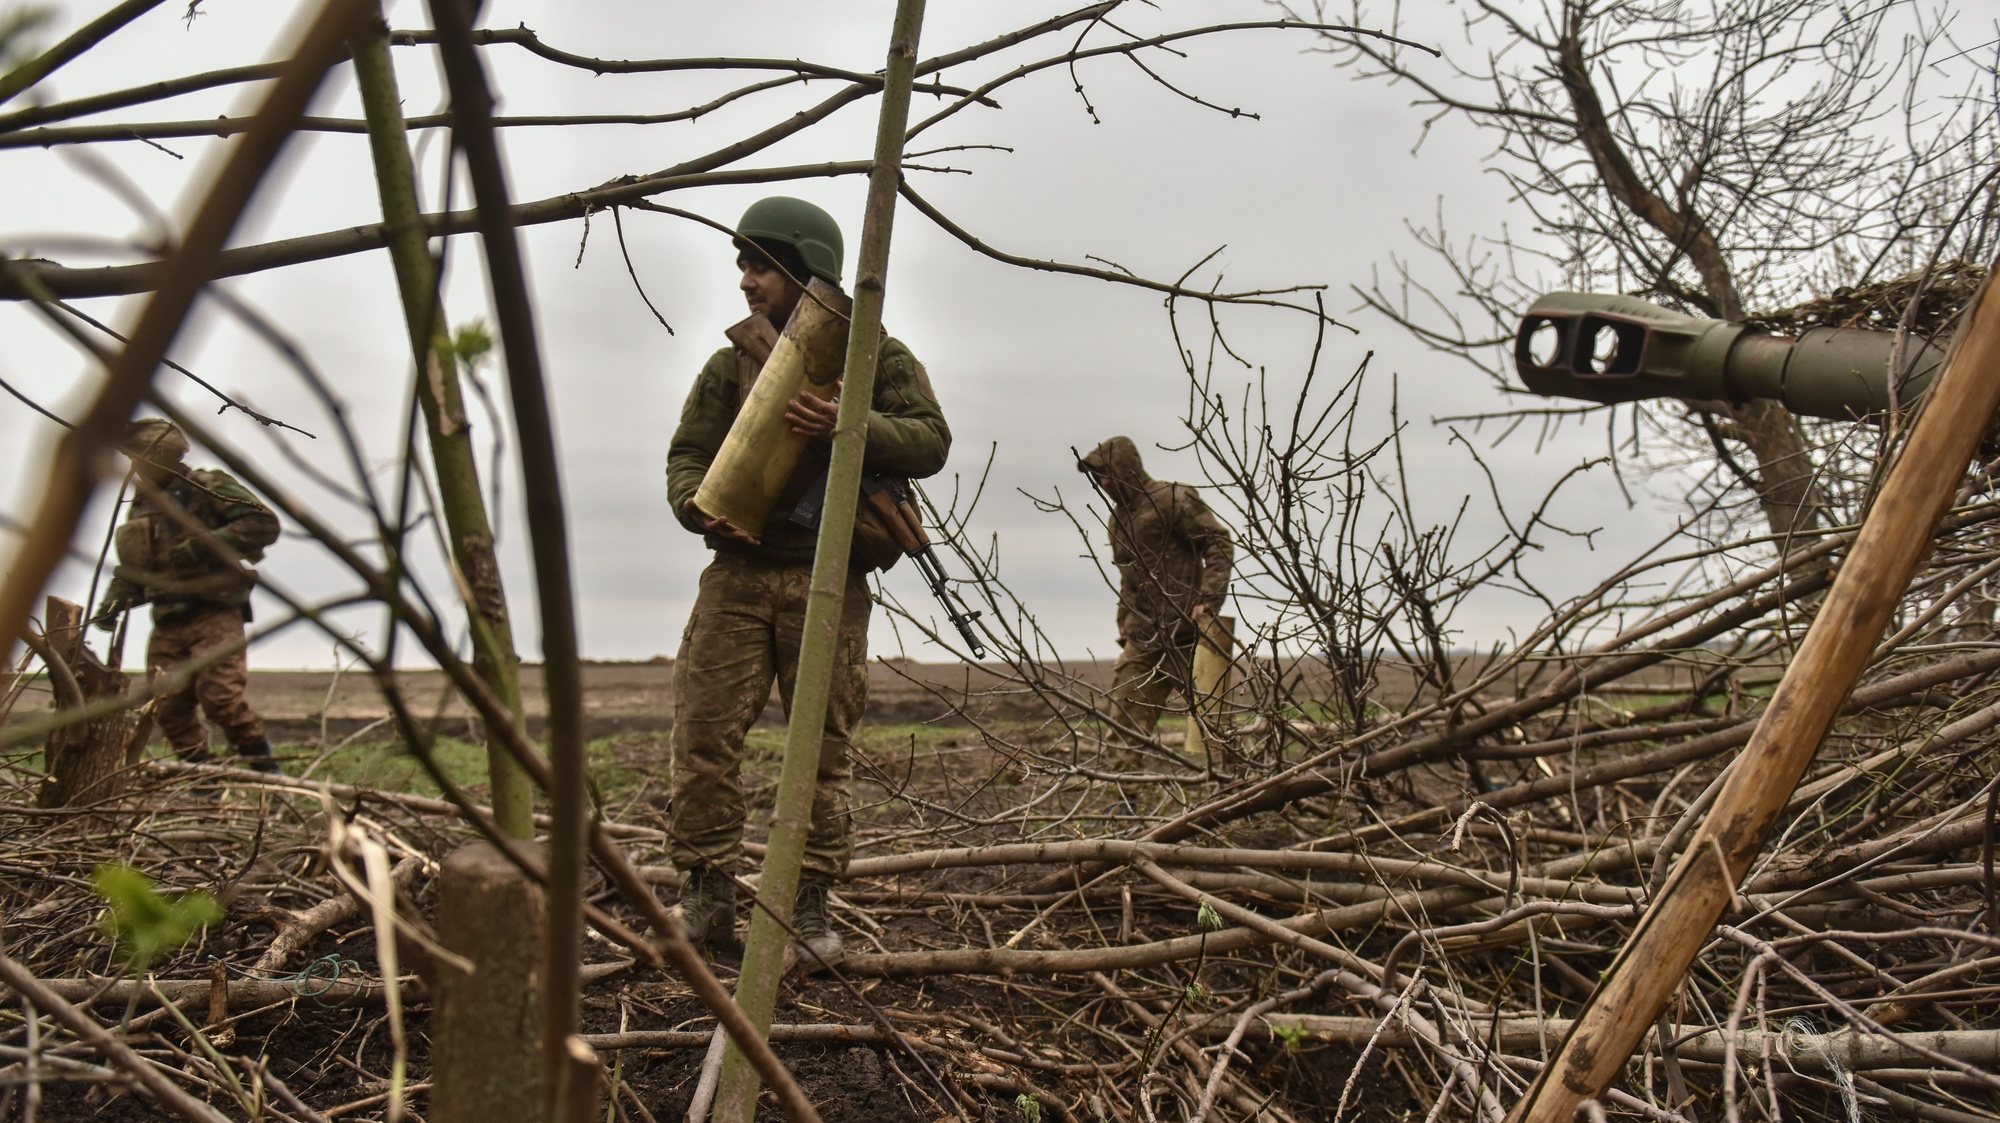 epa10569841 Ukrainian artillerymen of the 57th Otaman Kost Hordiienko Separate Motorized Infantry Brigade prepare to fire a 2s3 Akatsia howitzer at an undisclosed position near outskirts of Bakhmut, Donetsk region, Ukraine, 12 April 2023. Russian troops entered Ukrainian territory on 24 February 2022, starting a conflict that has provoked destruction and a humanitarian crisis.  EPA/OLEG PETRASYUK